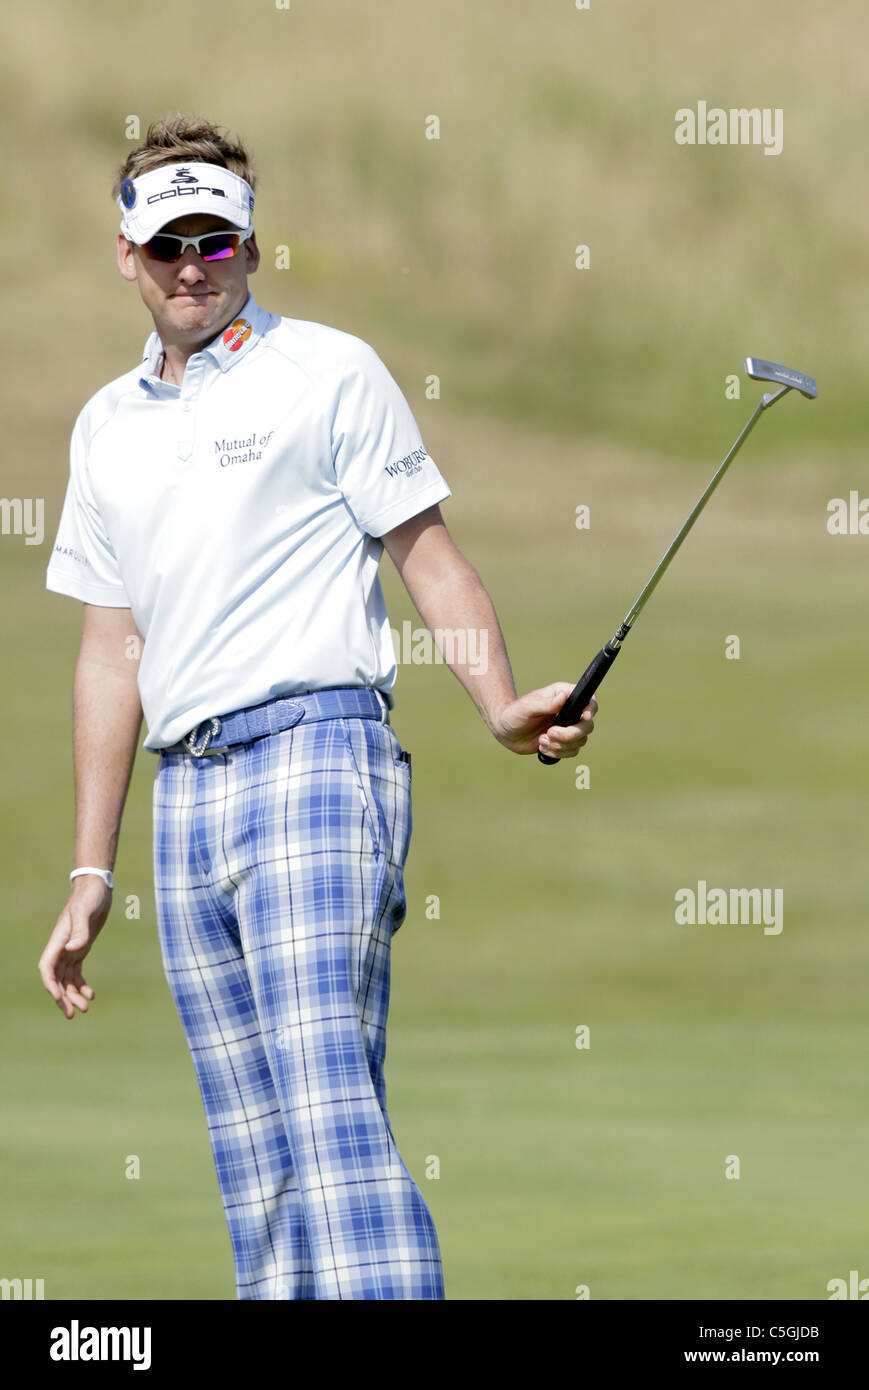 IAN POULTER THE OPEN CHAMPIONSHIP ROYAL ST.GEORGE'S SANDWICH KENT ENGLAND 15 July 2011 Stock Photo